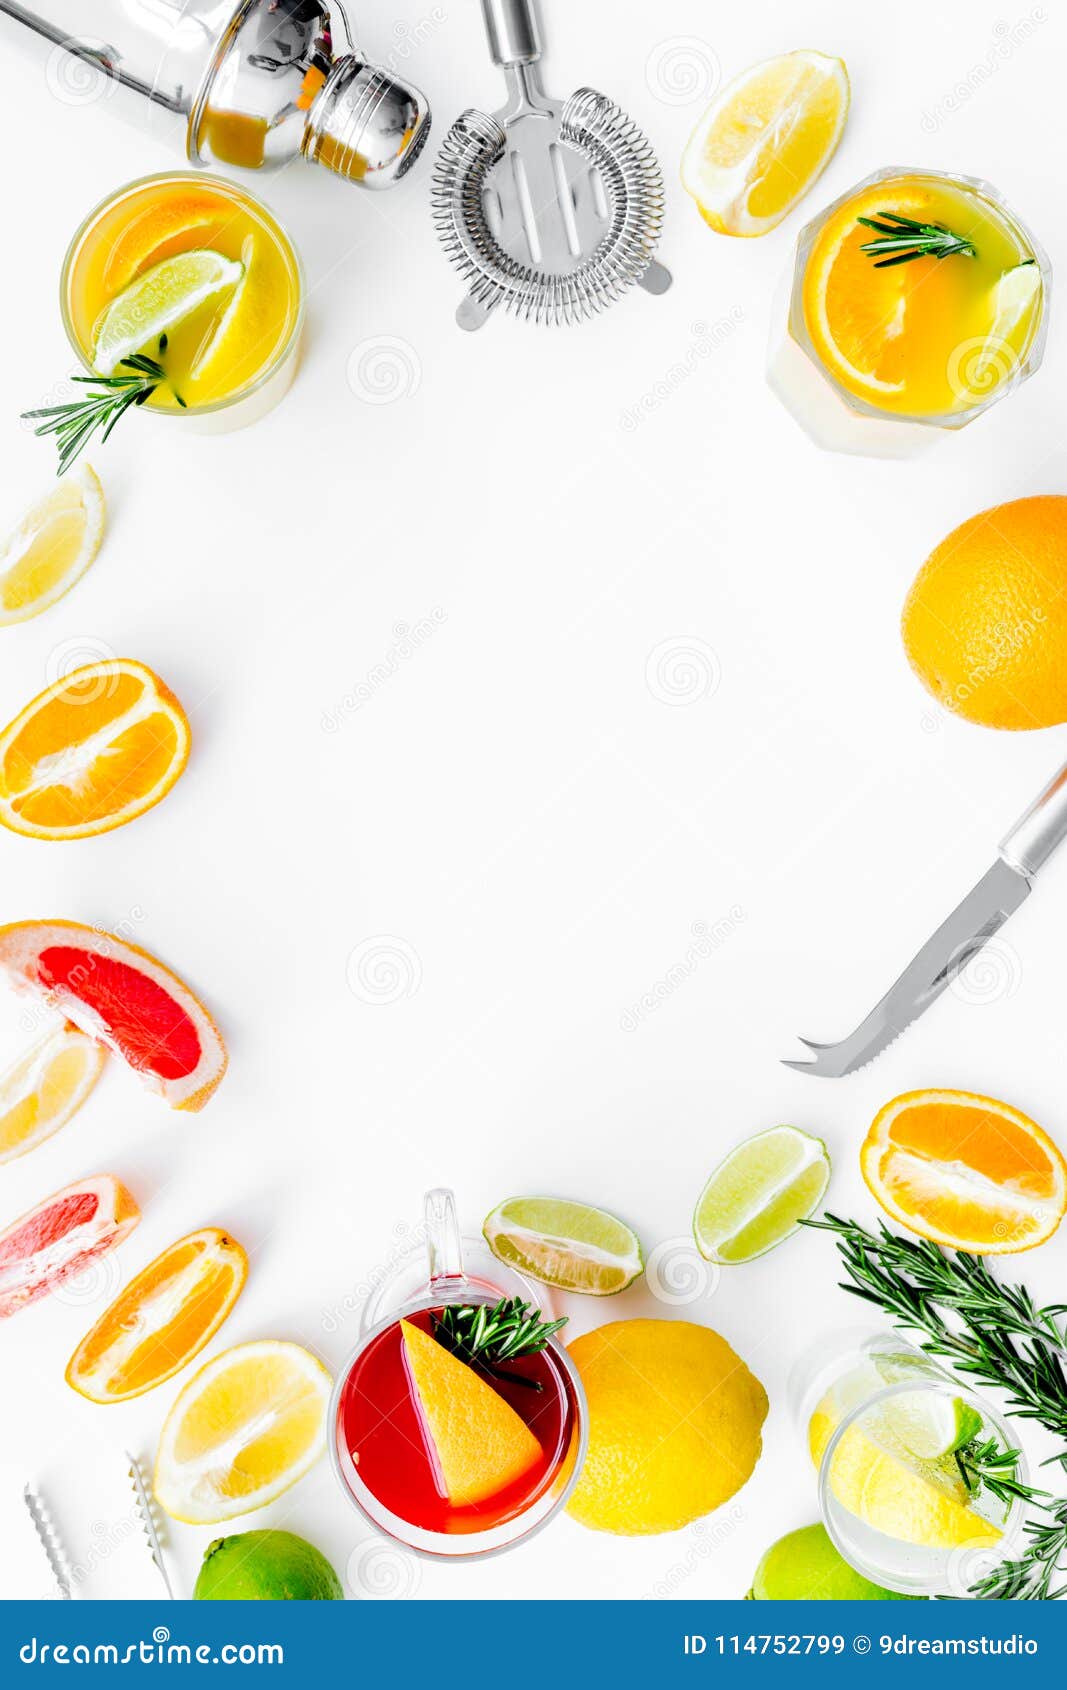 Download Bartender Workplace For Make Fruit Cocktail With Alcohol ...